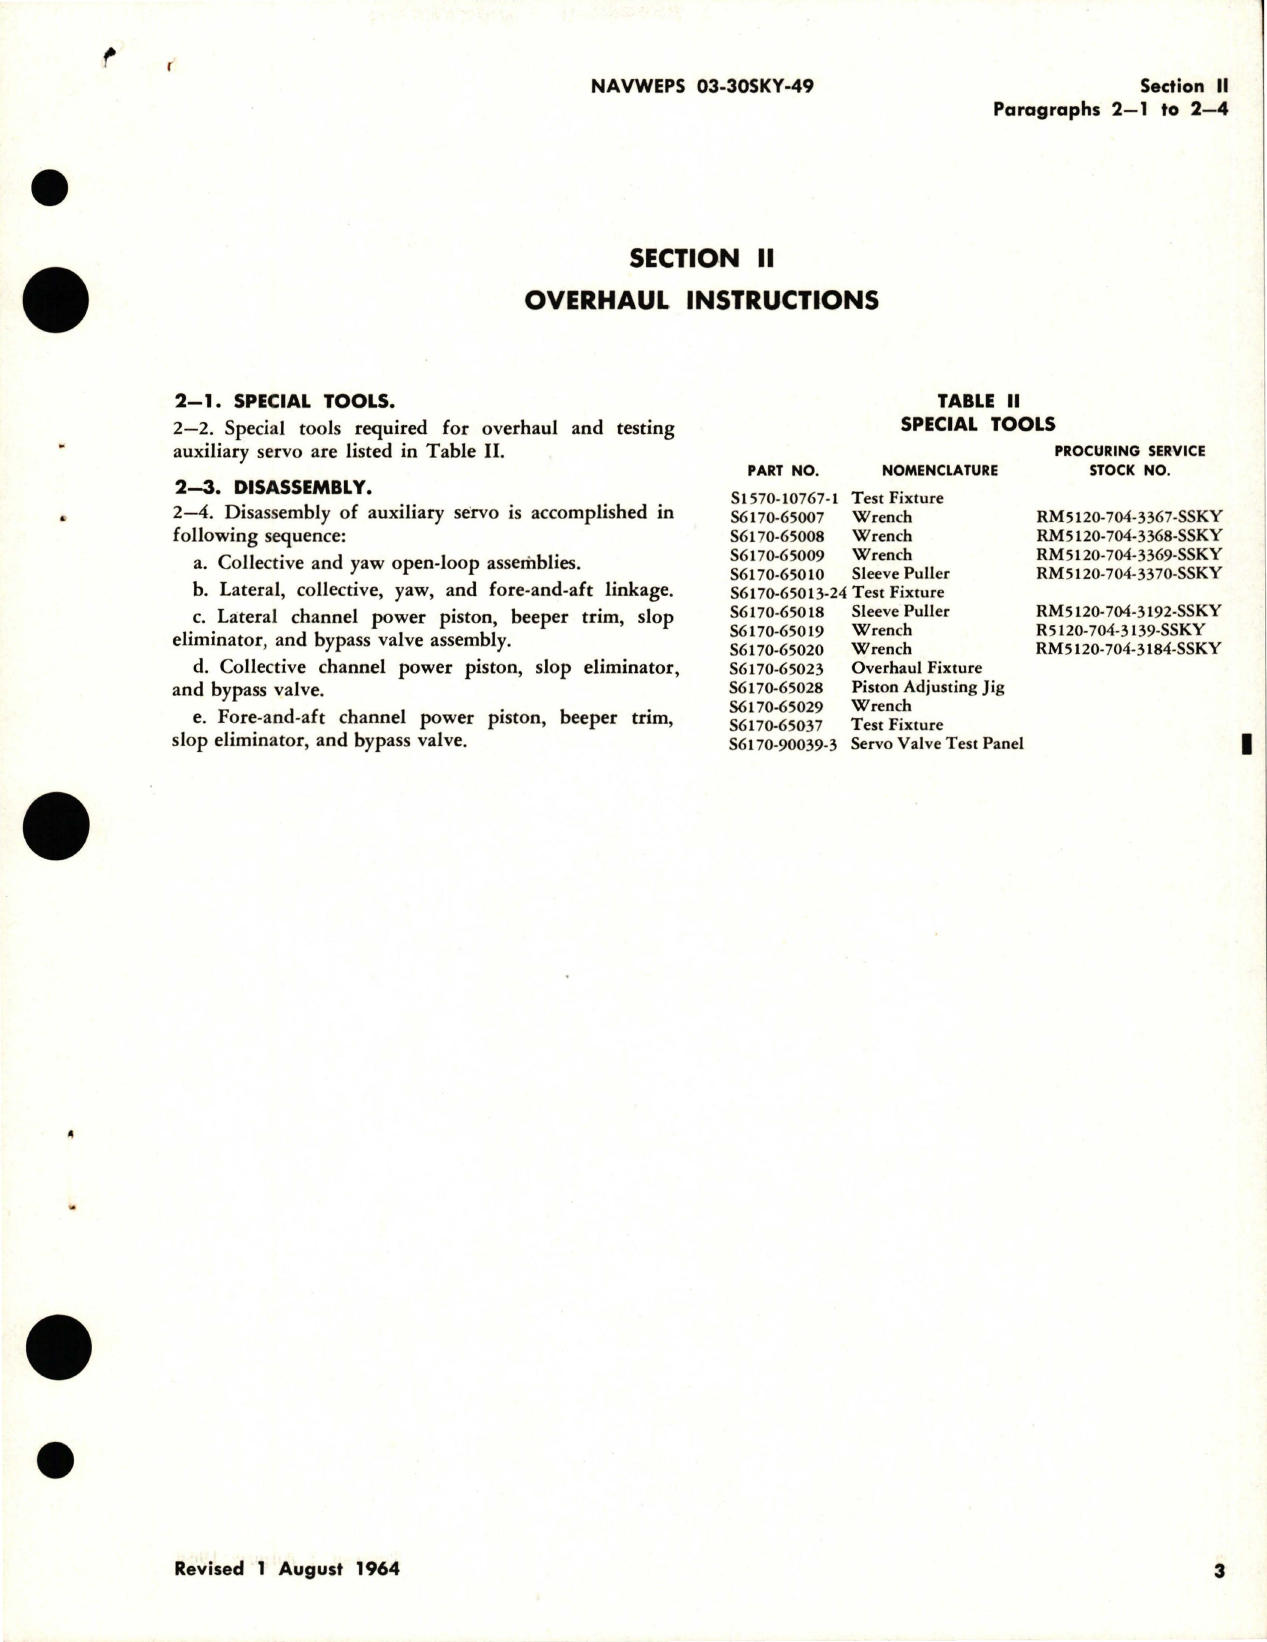 Sample page 7 from AirCorps Library document: Overhaul Instructions for Auxiliary Servocylinder Assembly - Parts S6165-61500-6, S6165-61500-7, and S6165-61500-10 